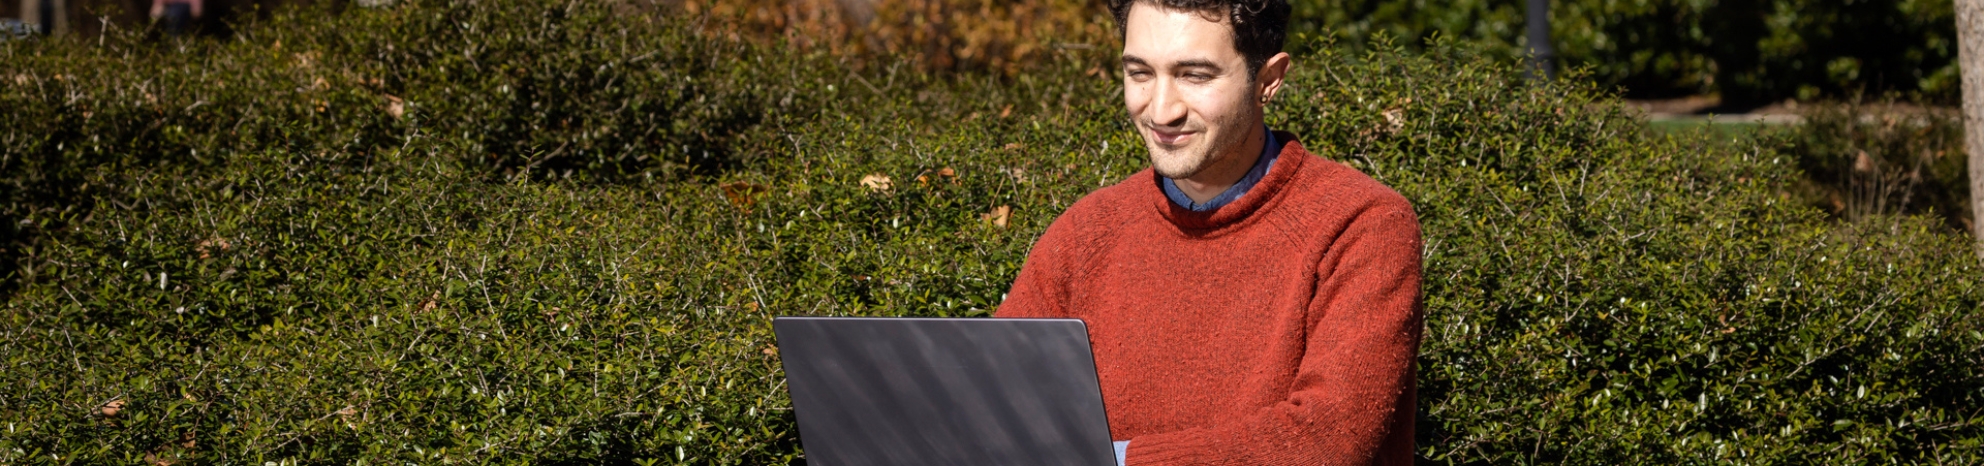 student in red sweater working on laptop outside